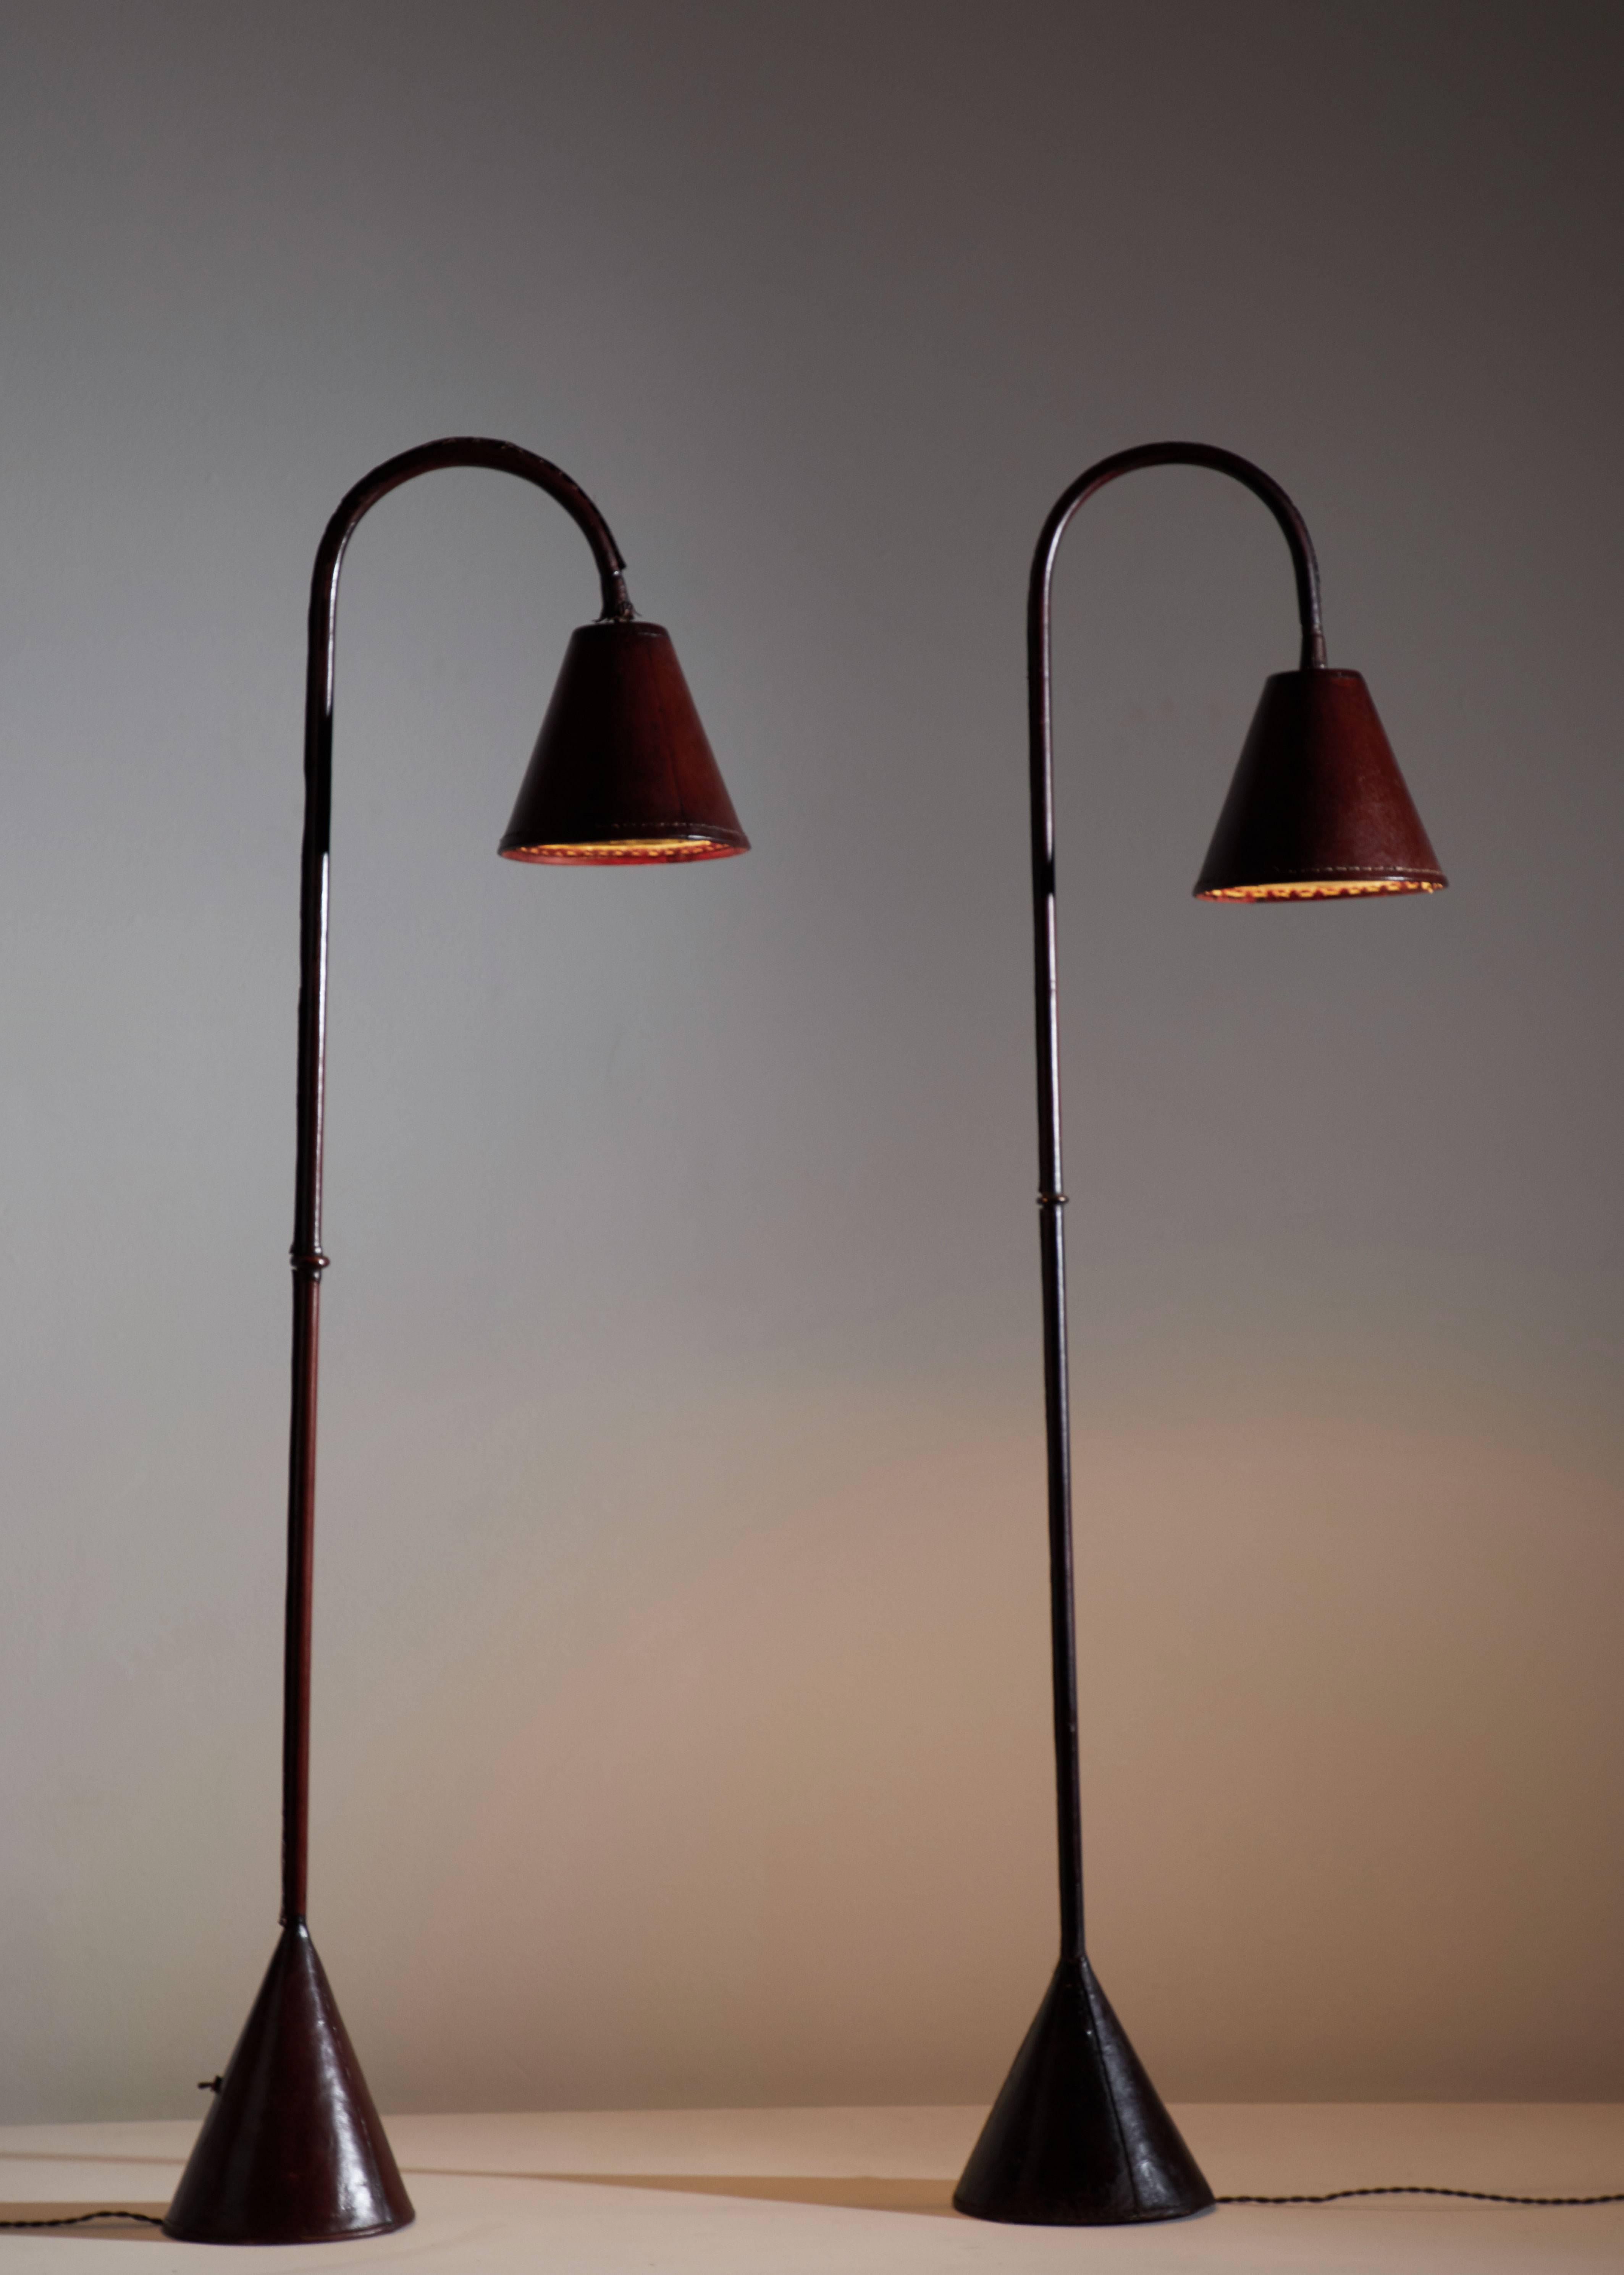 Spanish Leather wrapped floor lamp in the Style of Jacques Adnet designed in France, circa 1950s.
Saddle-stitched Mahogany leather over steel. Shade articulates up/down and left/right. On/off switch on base of lamp. Rewired with French twist cord.